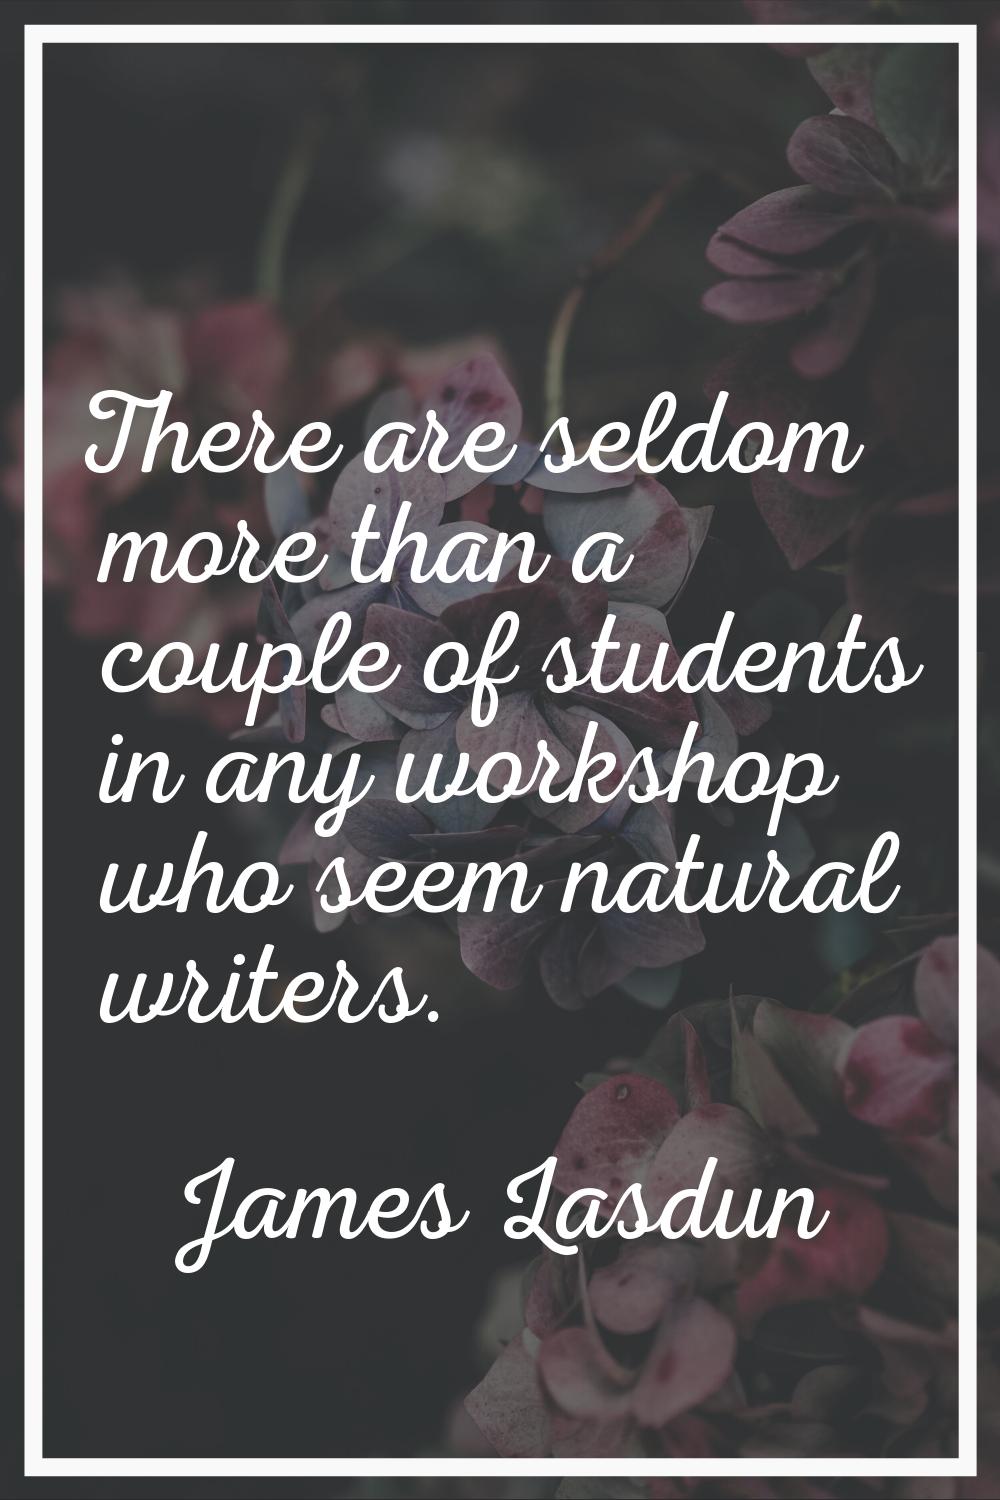 There are seldom more than a couple of students in any workshop who seem natural writers.